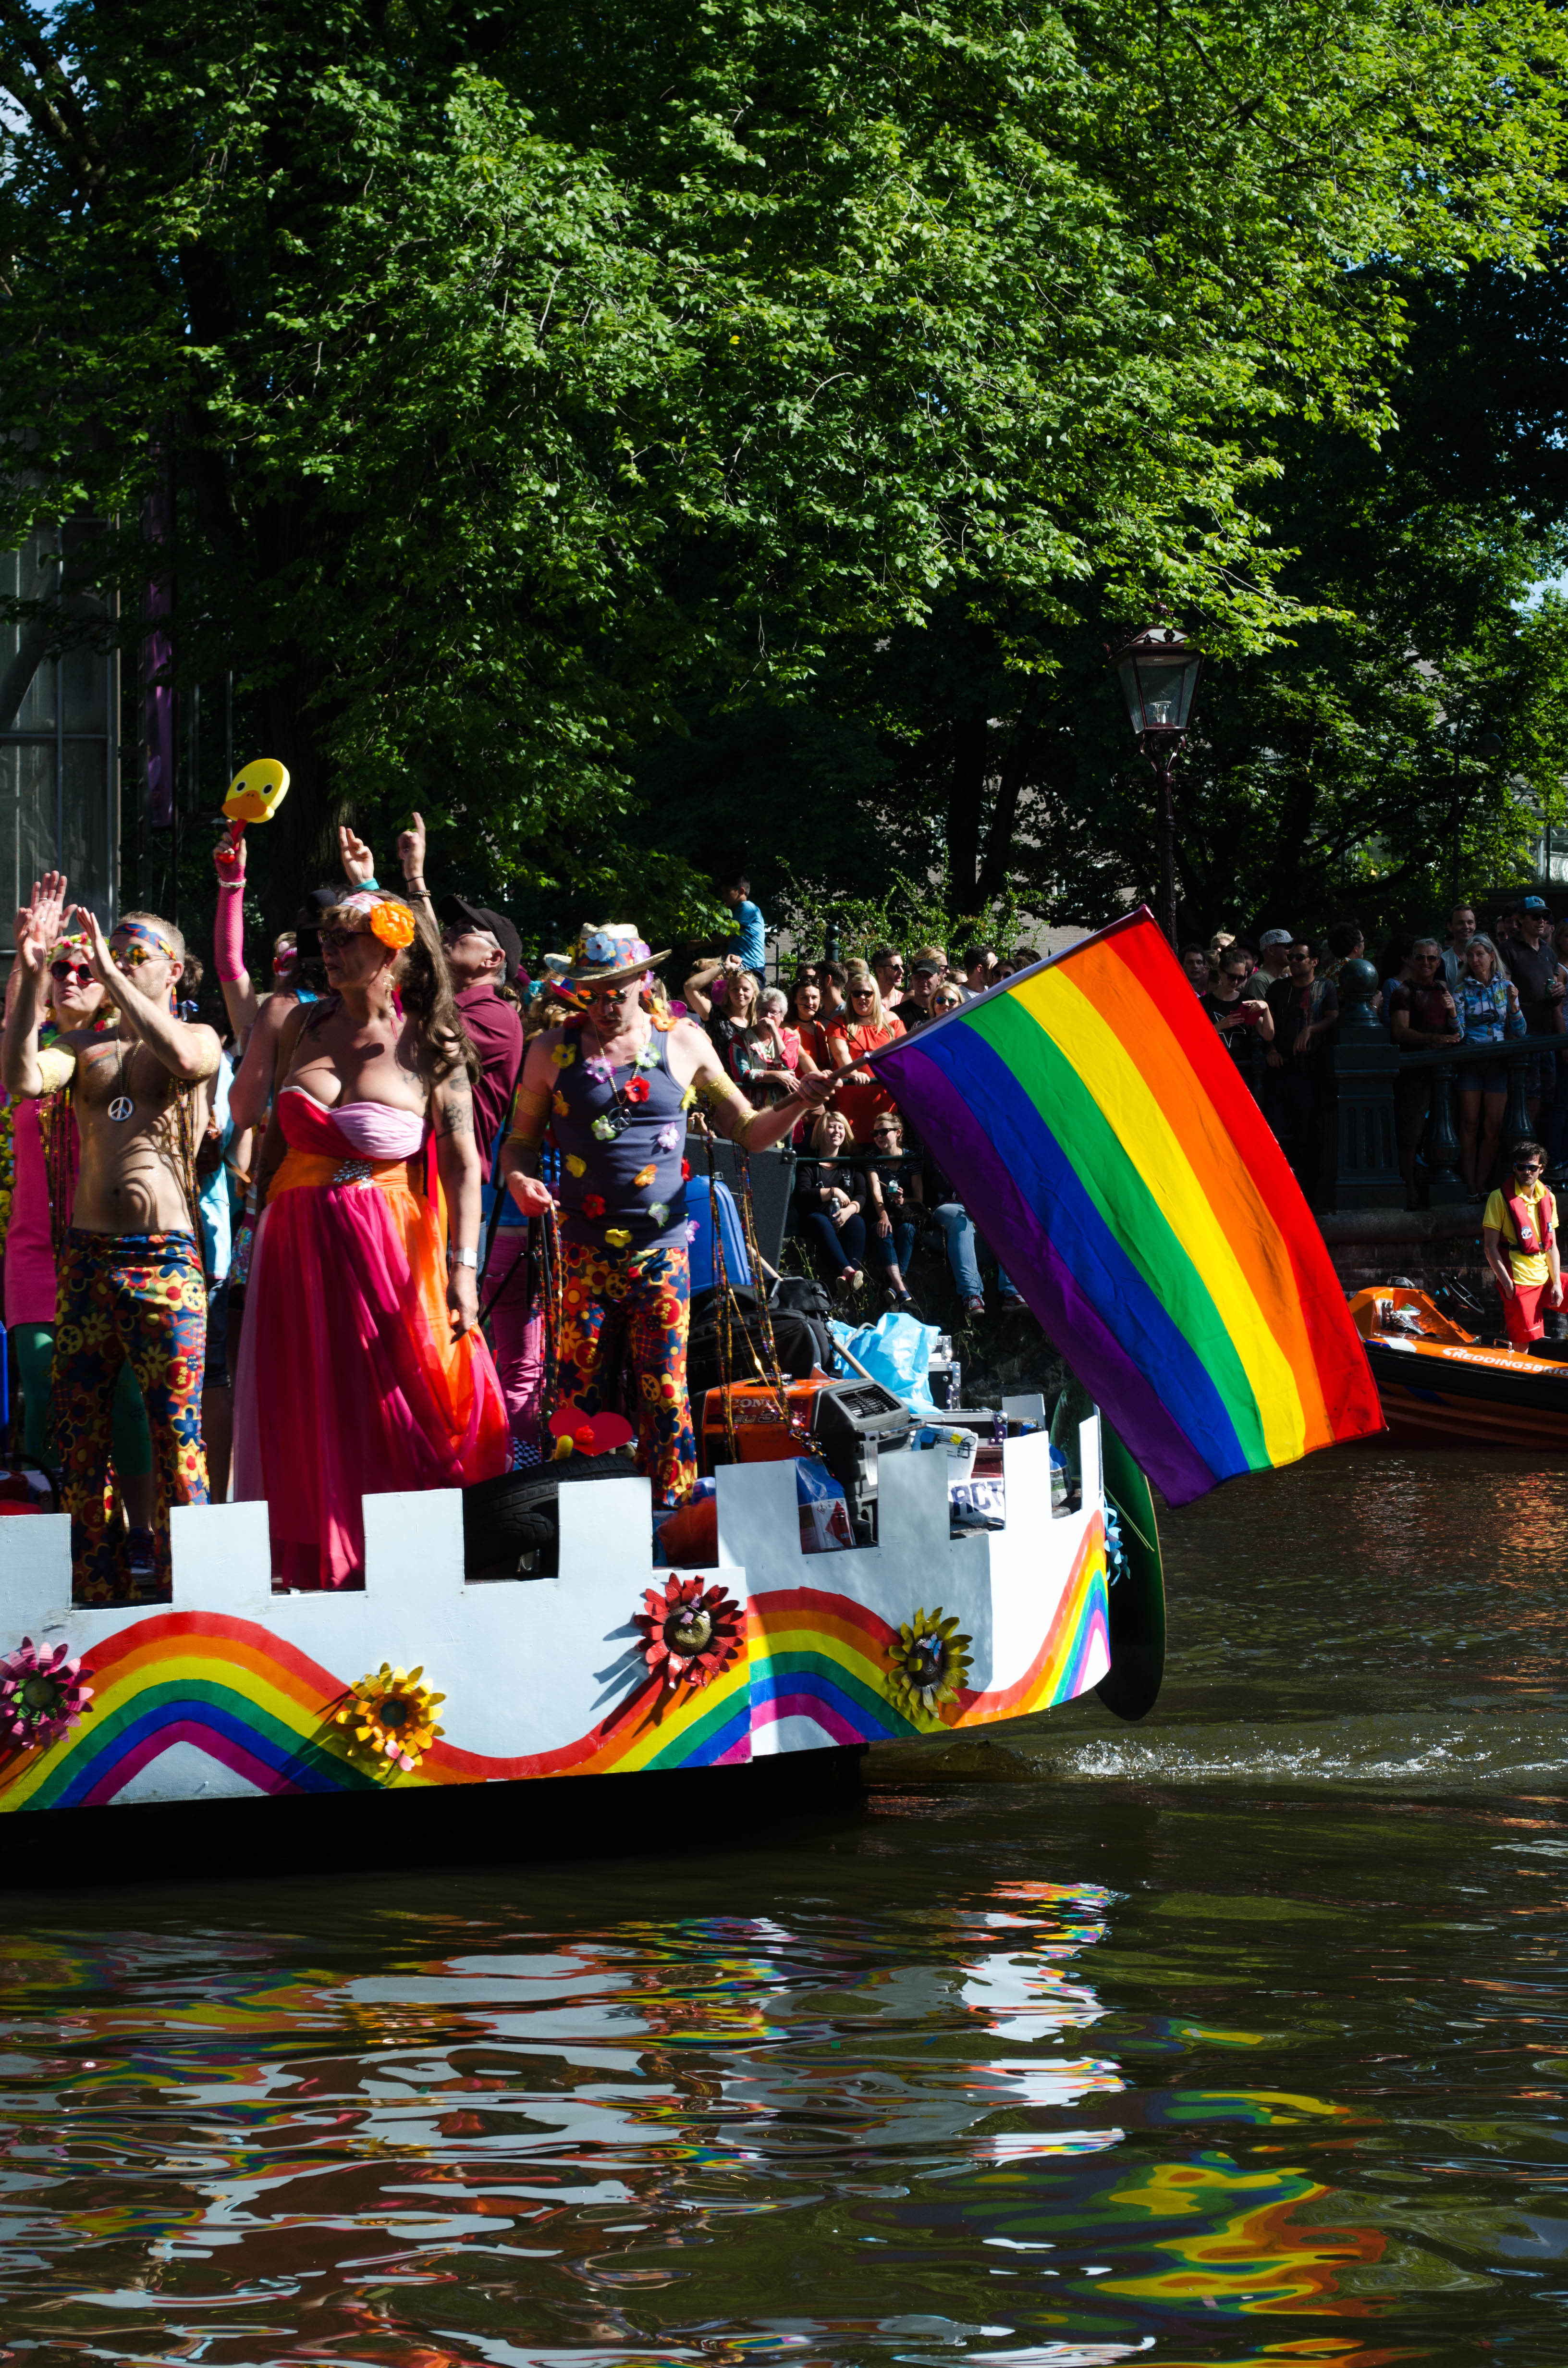 rainbow flag on proud display during the 2016 Pride Parade in Amsterdam